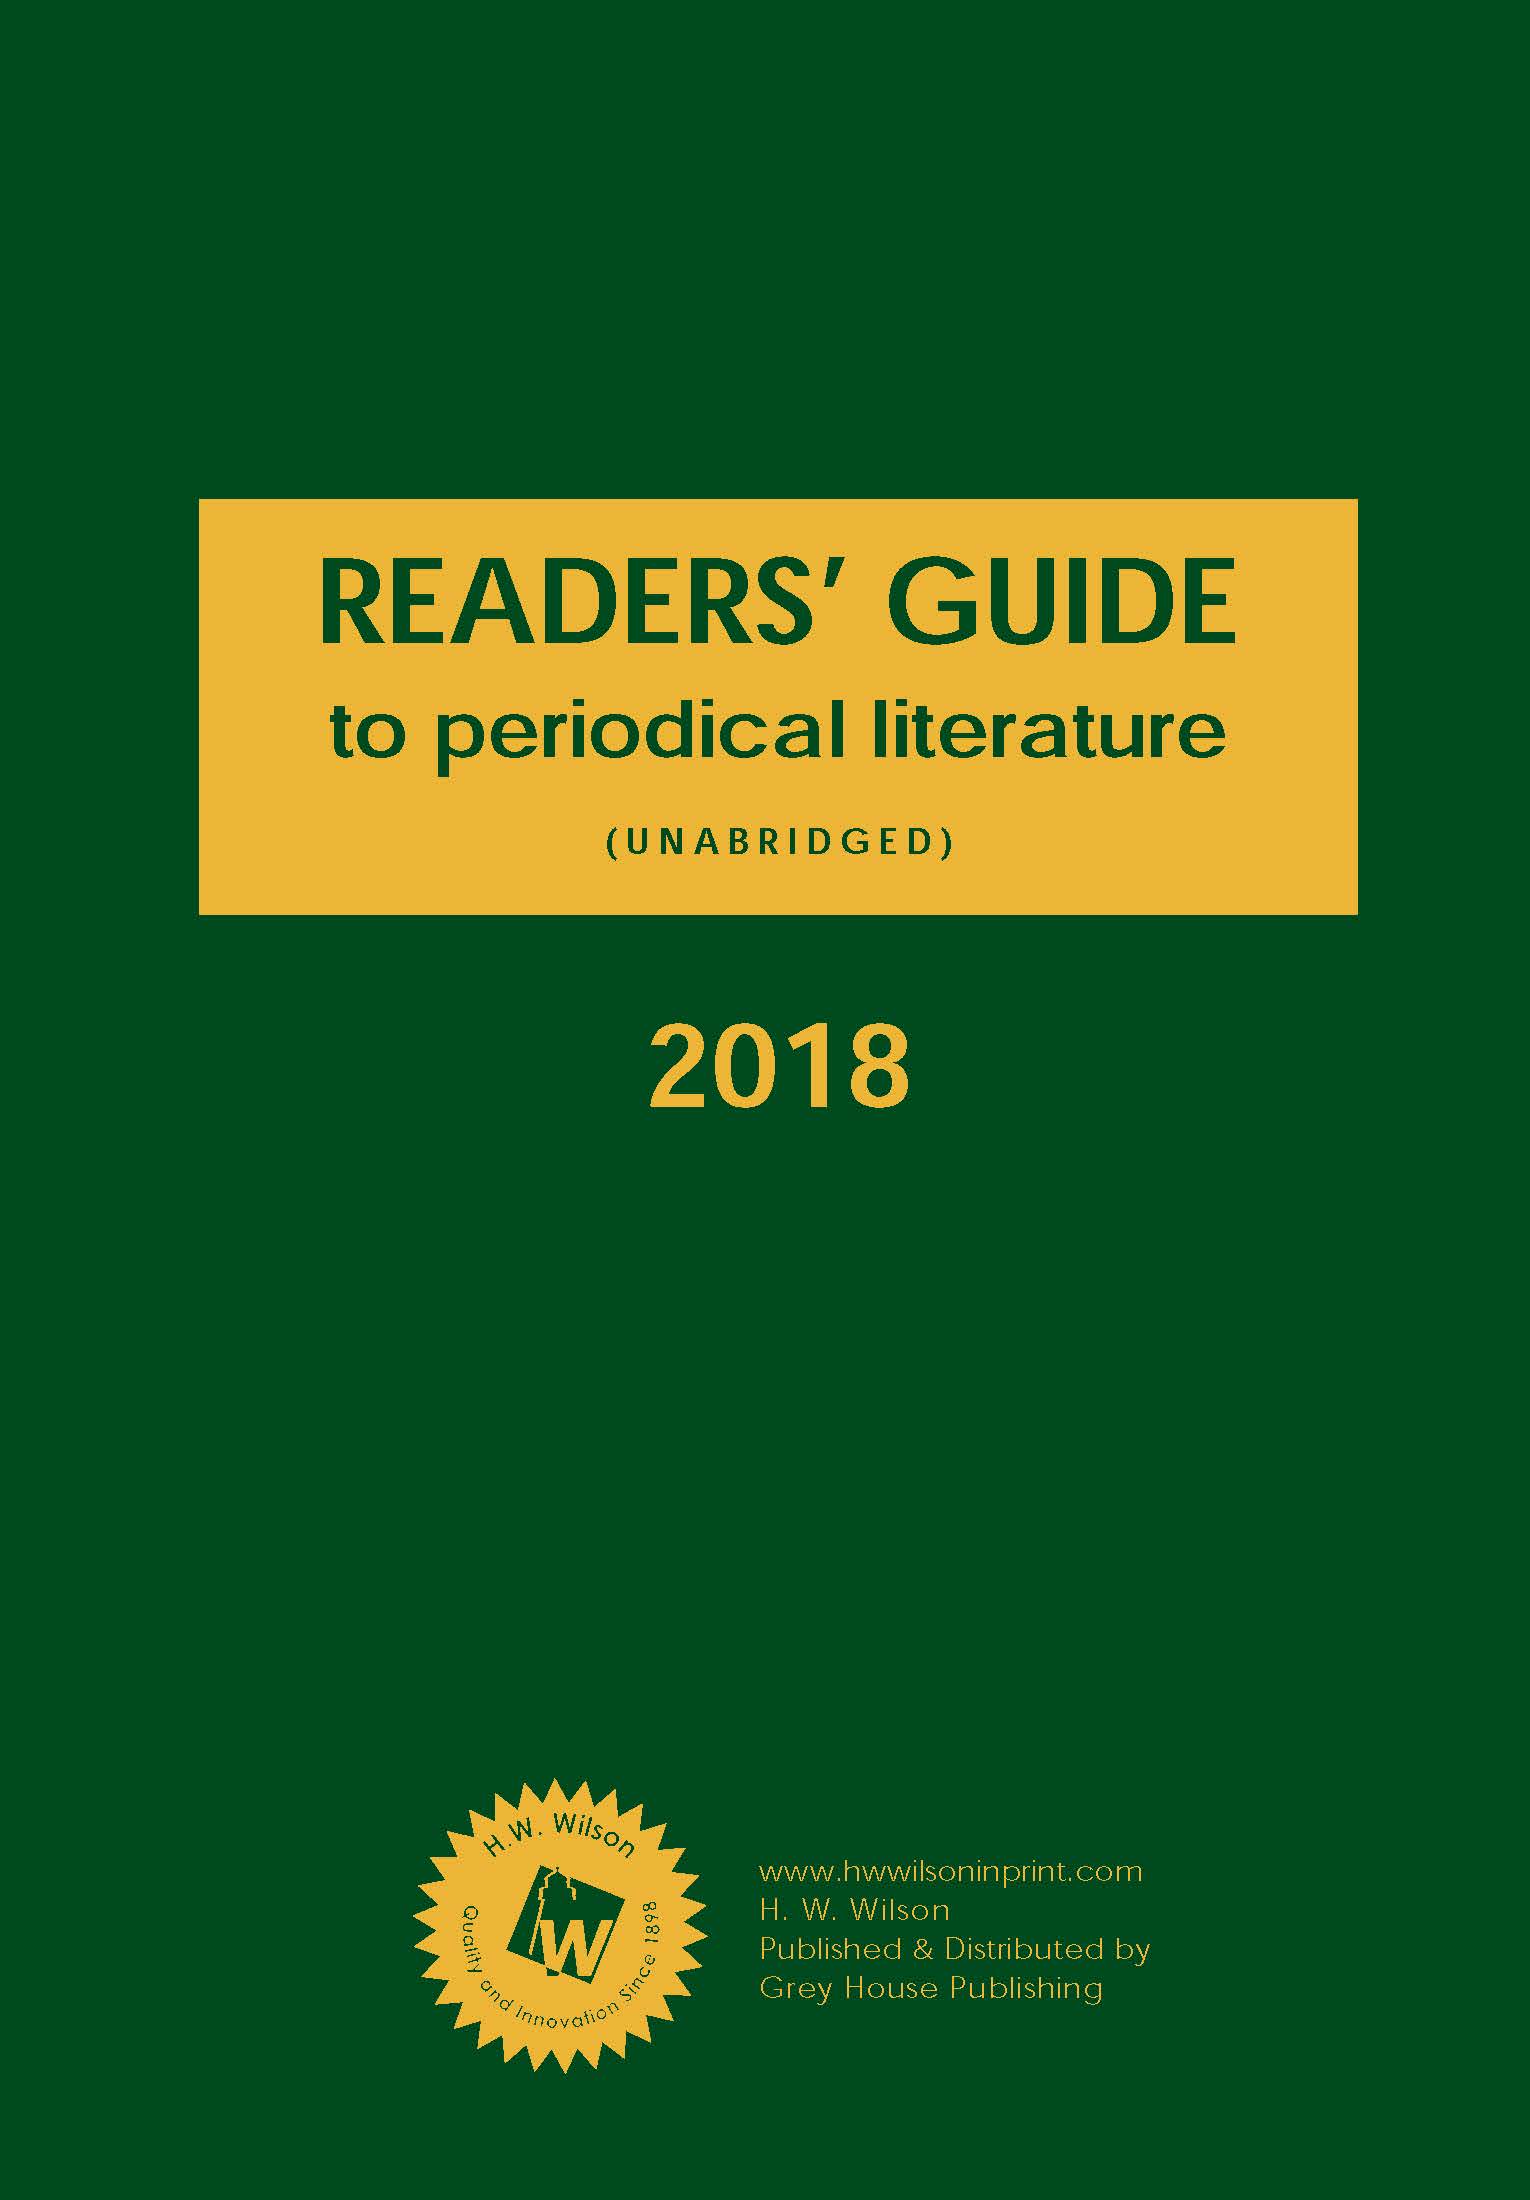 Reader's Guide to periodical literature